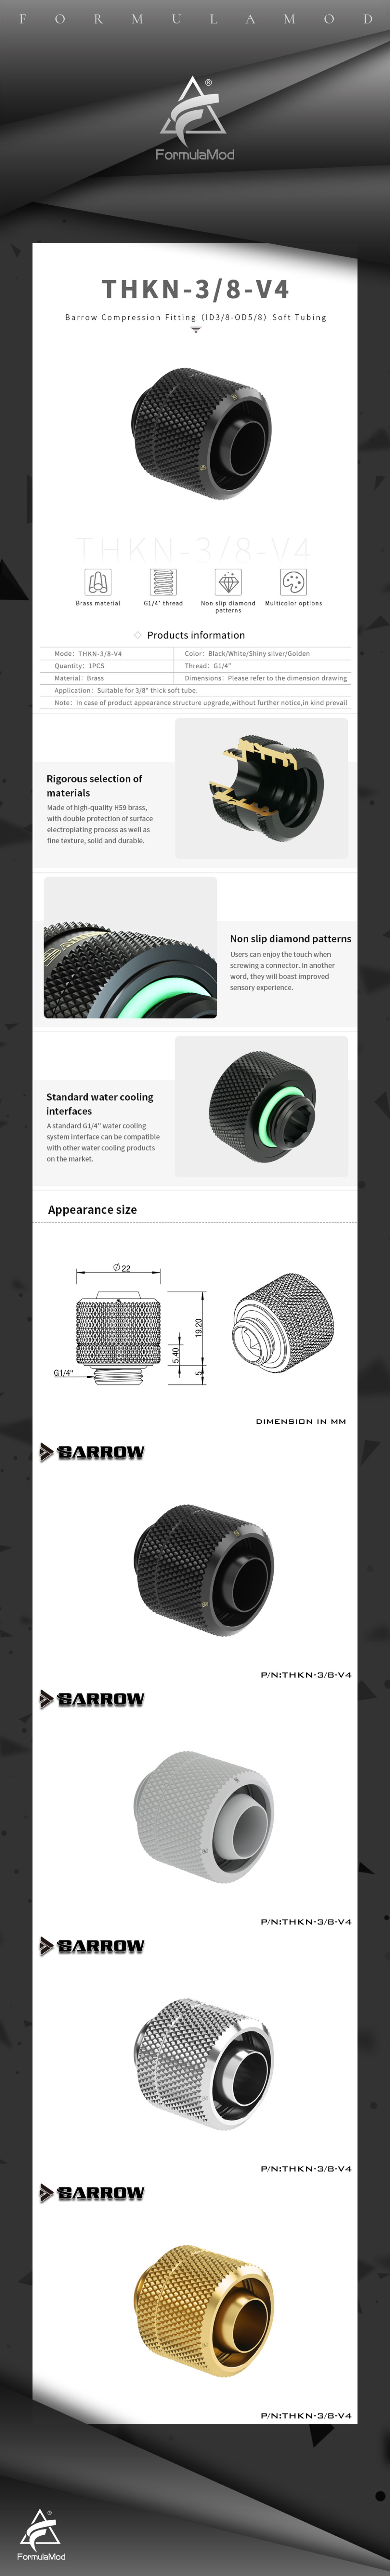 Barrow 10x16mm Soft Tube Fitting, 3/8"ID*5/8"OD G1/4" Compression Connector, Water Cooling Soft Tubing Compression Adapter, THKN-3/8-V4  